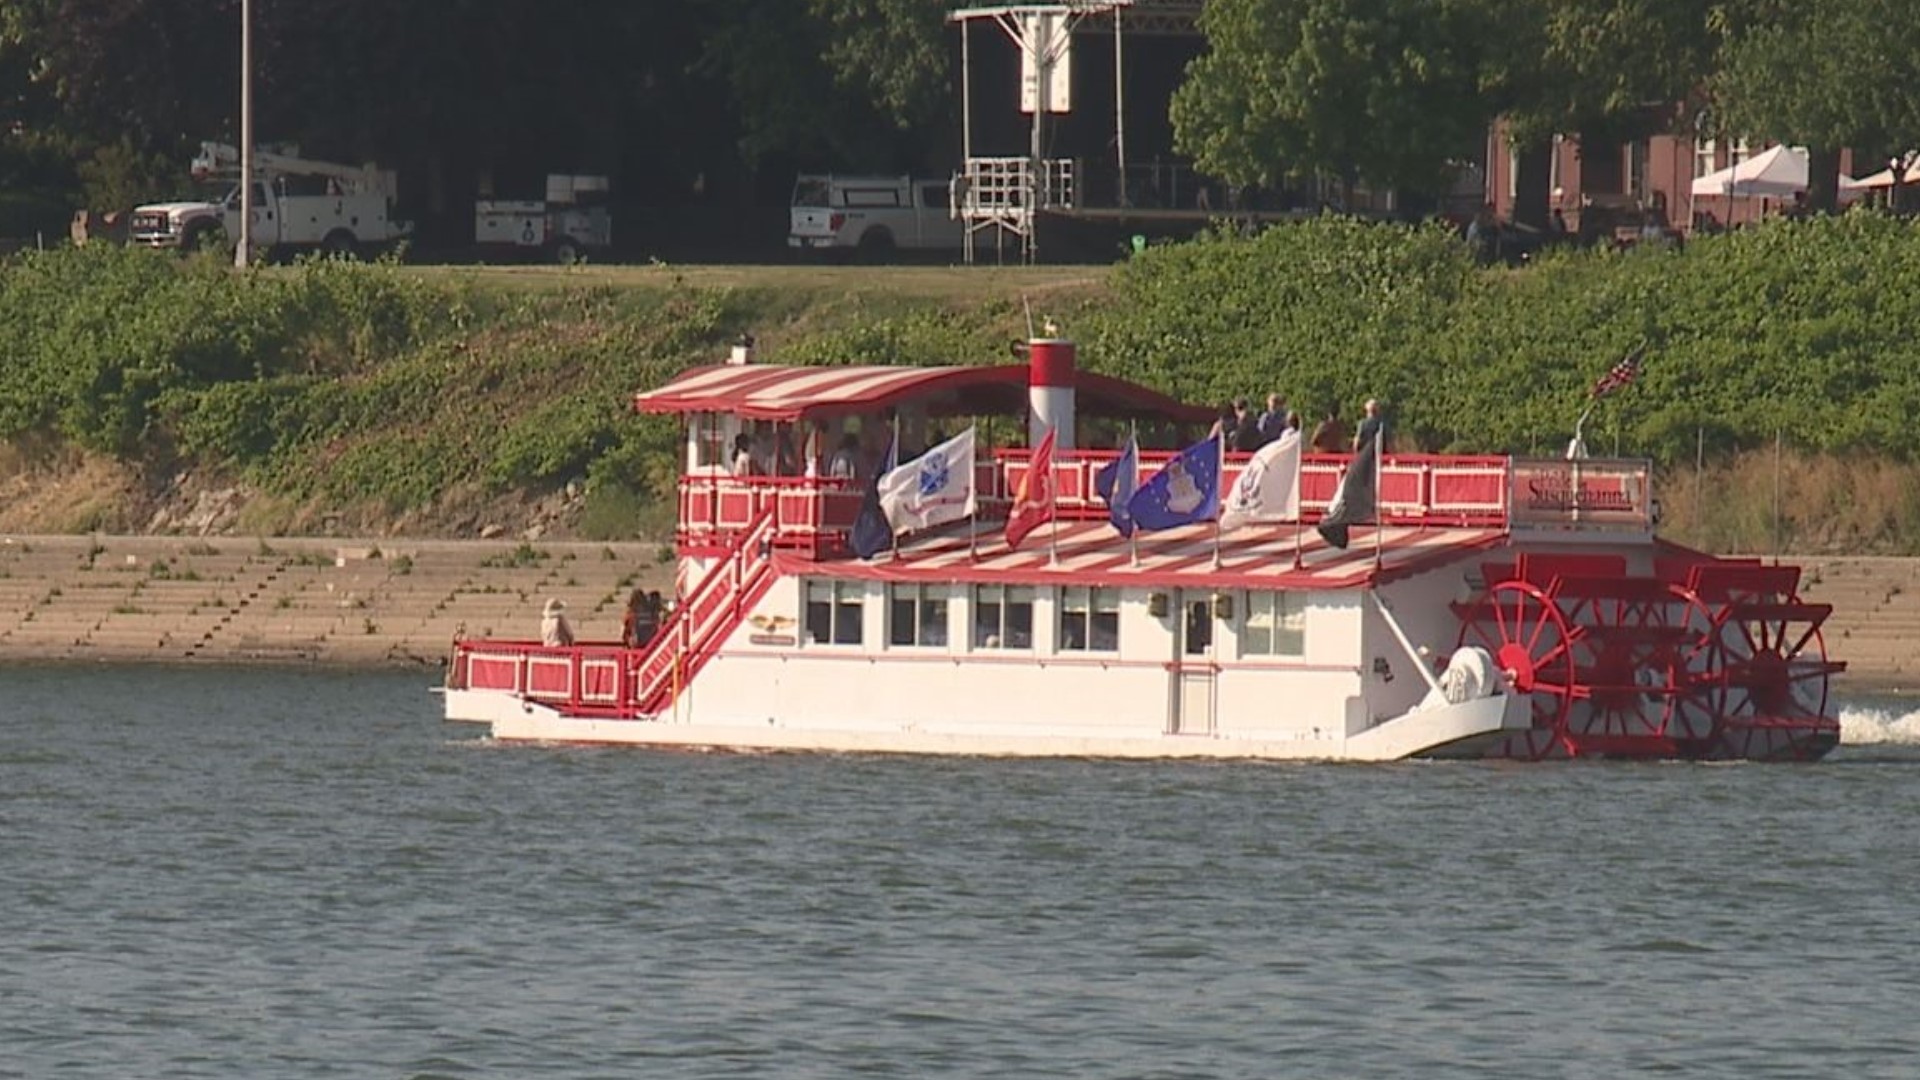 While Monday's cruise was in honor of Memorial Day, veterans can ride the Pride of the Susquehanna for free throughout the summer.